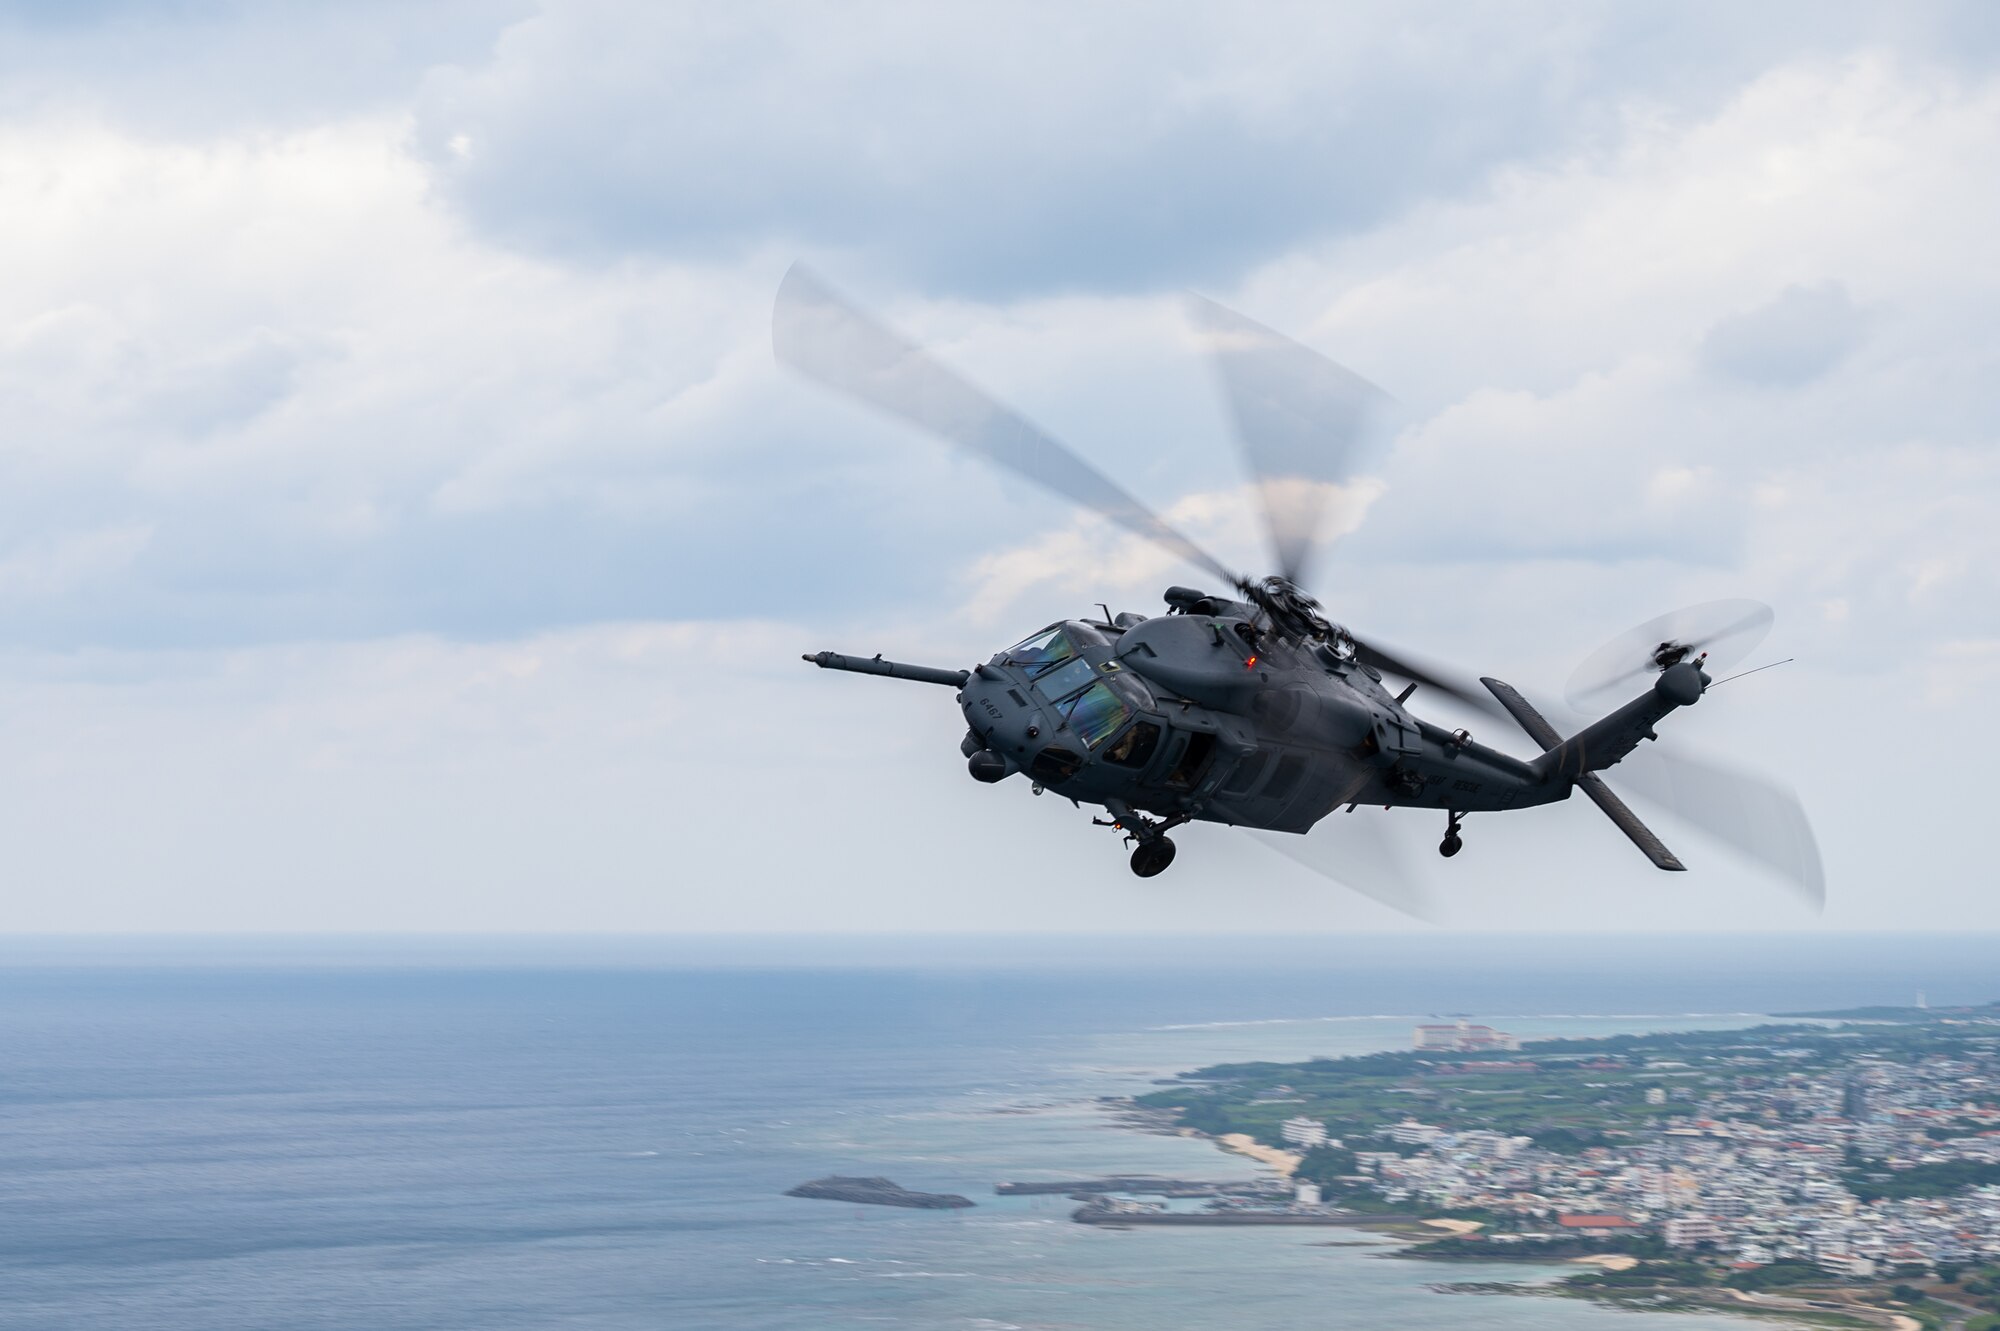 A helicopter flies over Okinawa.